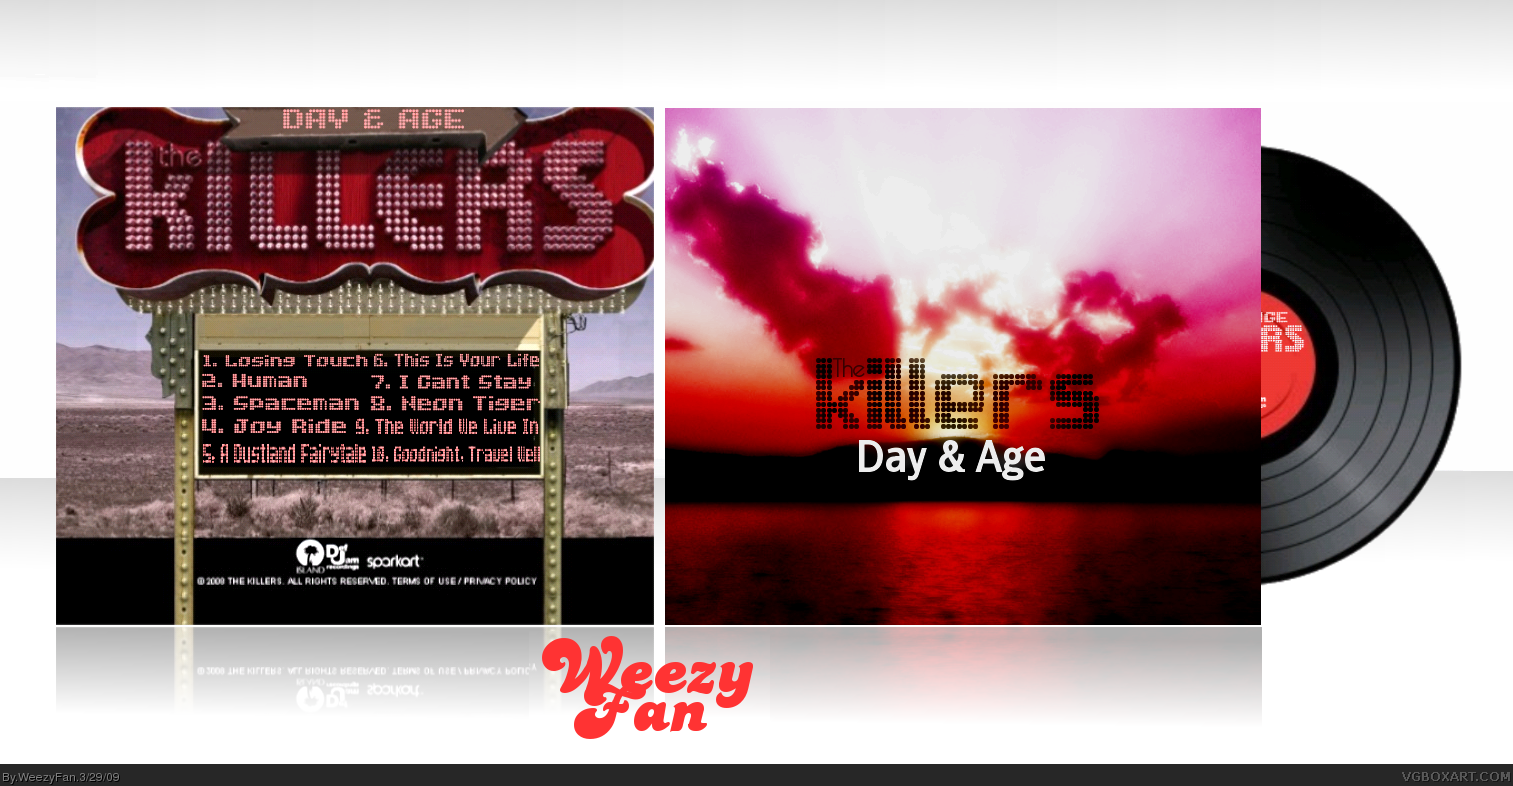 Killers обложка. The Killers Day and age обложка. The Killers - Day & age (2008). The Killers альбом Day & age. Killer Art.